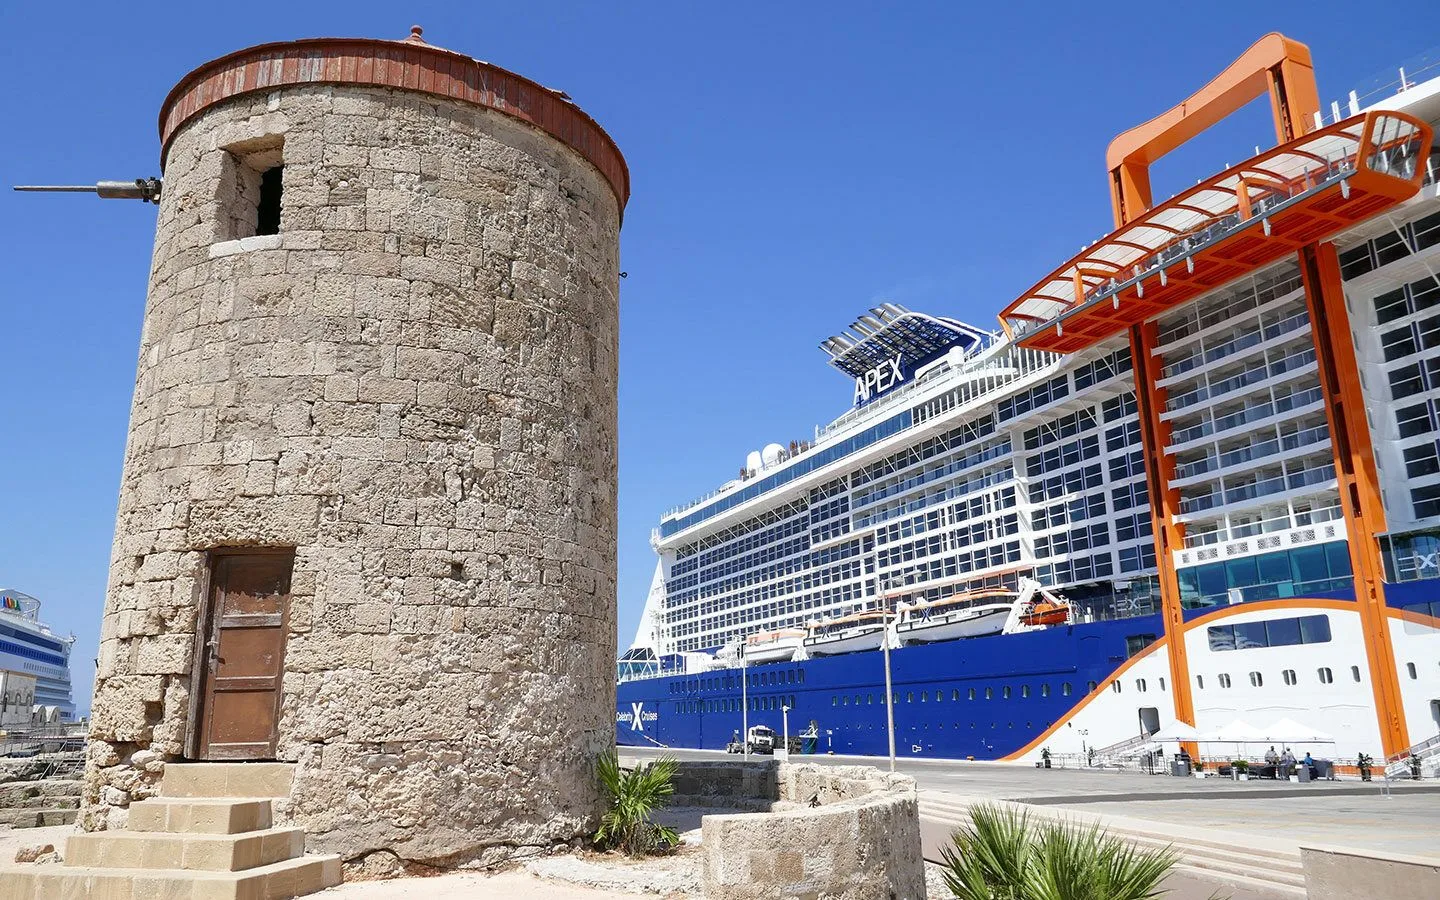 Celebrity Apex cruise ship in Rhodes Town